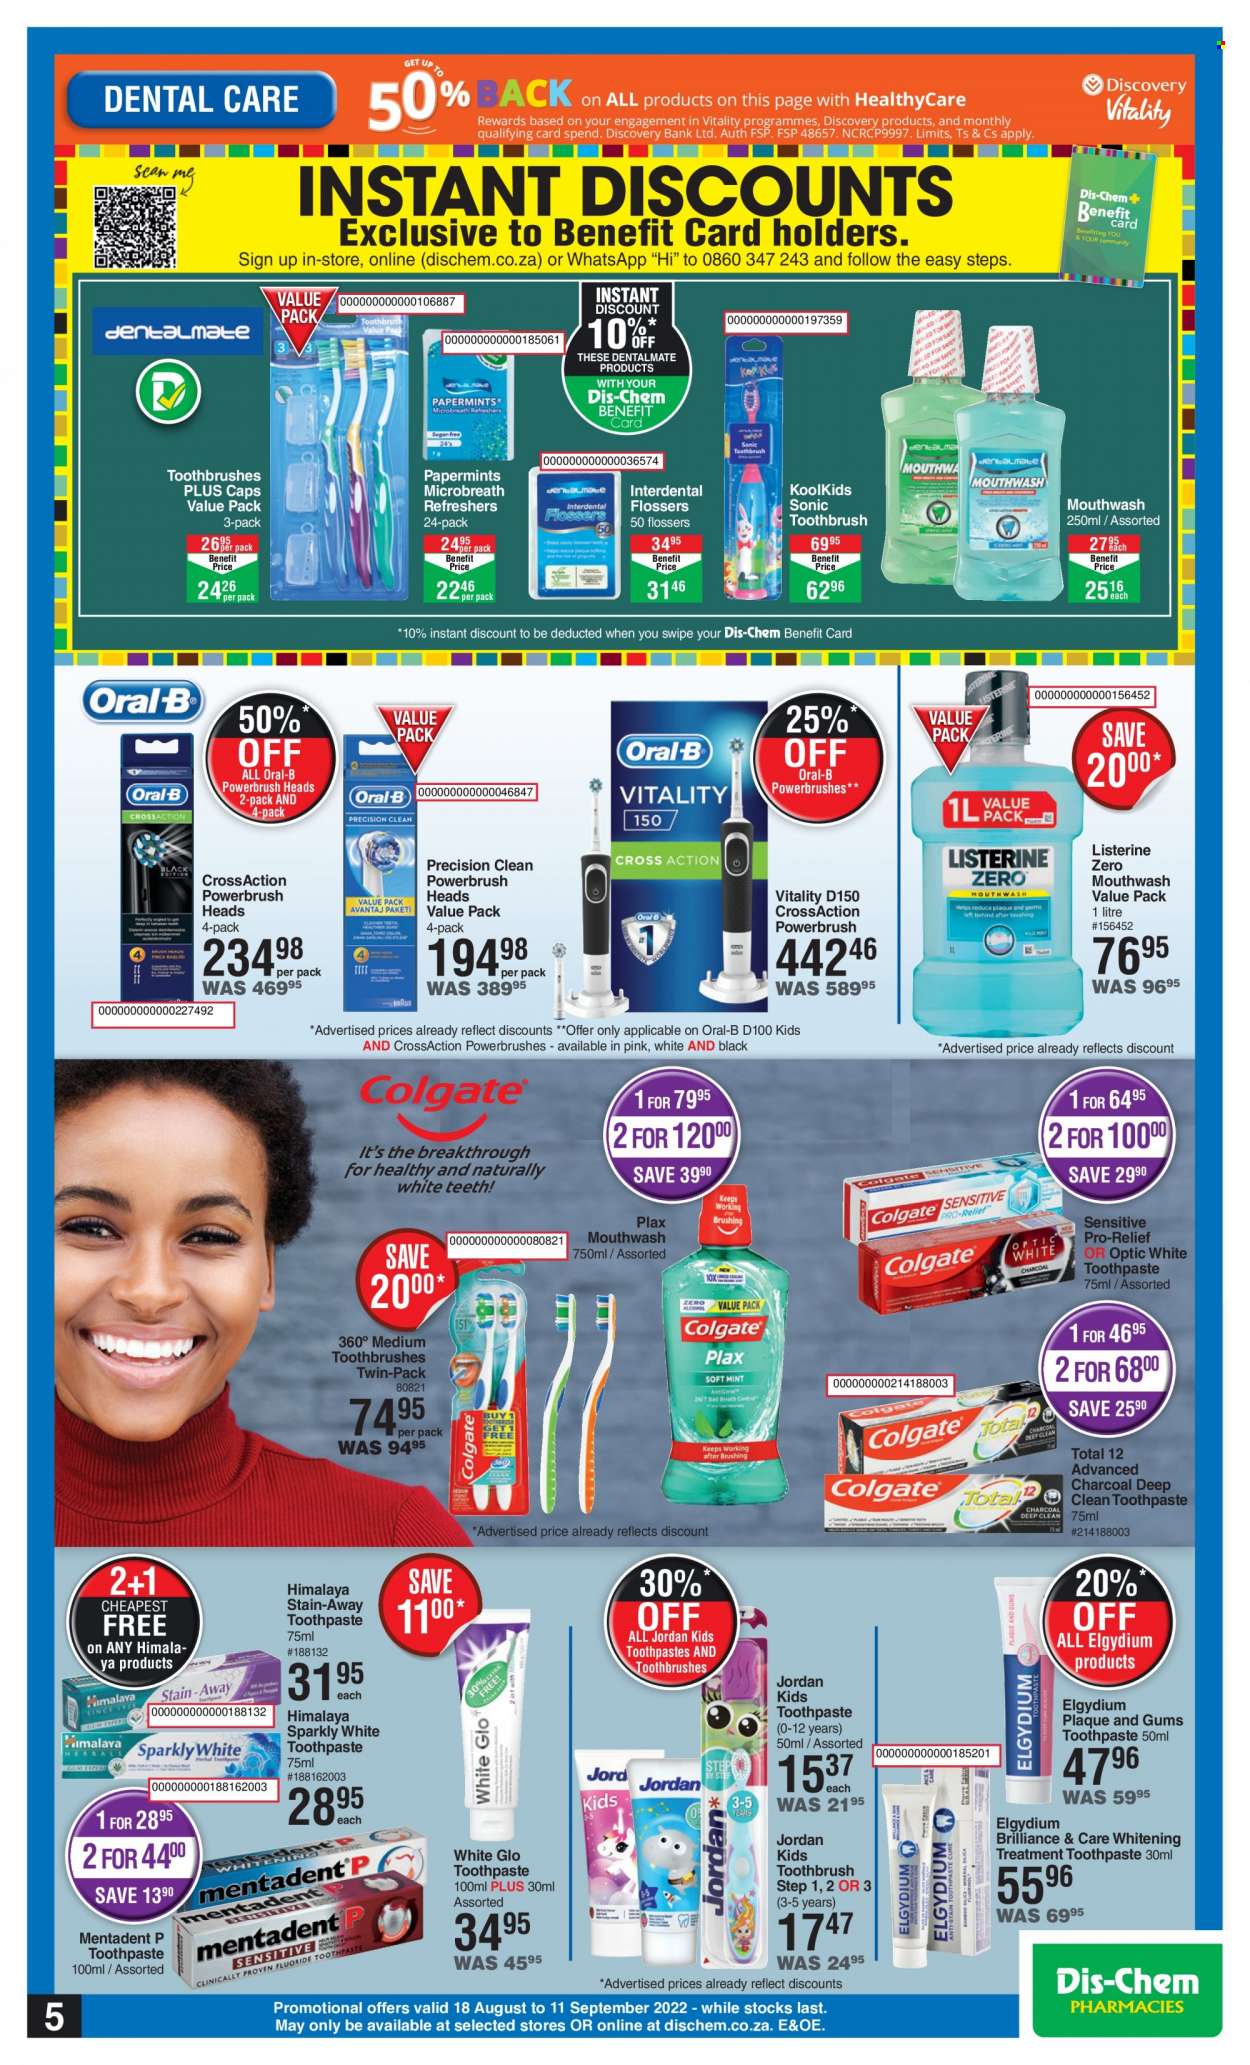 thumbnail - Dis-Chem catalogue  - 18/08/2022 - 11/09/2022 - Sales products - Listerine, toothbrush, Oral-B, toothpaste, mouthwash, Mentadent, Plax. Page 5.